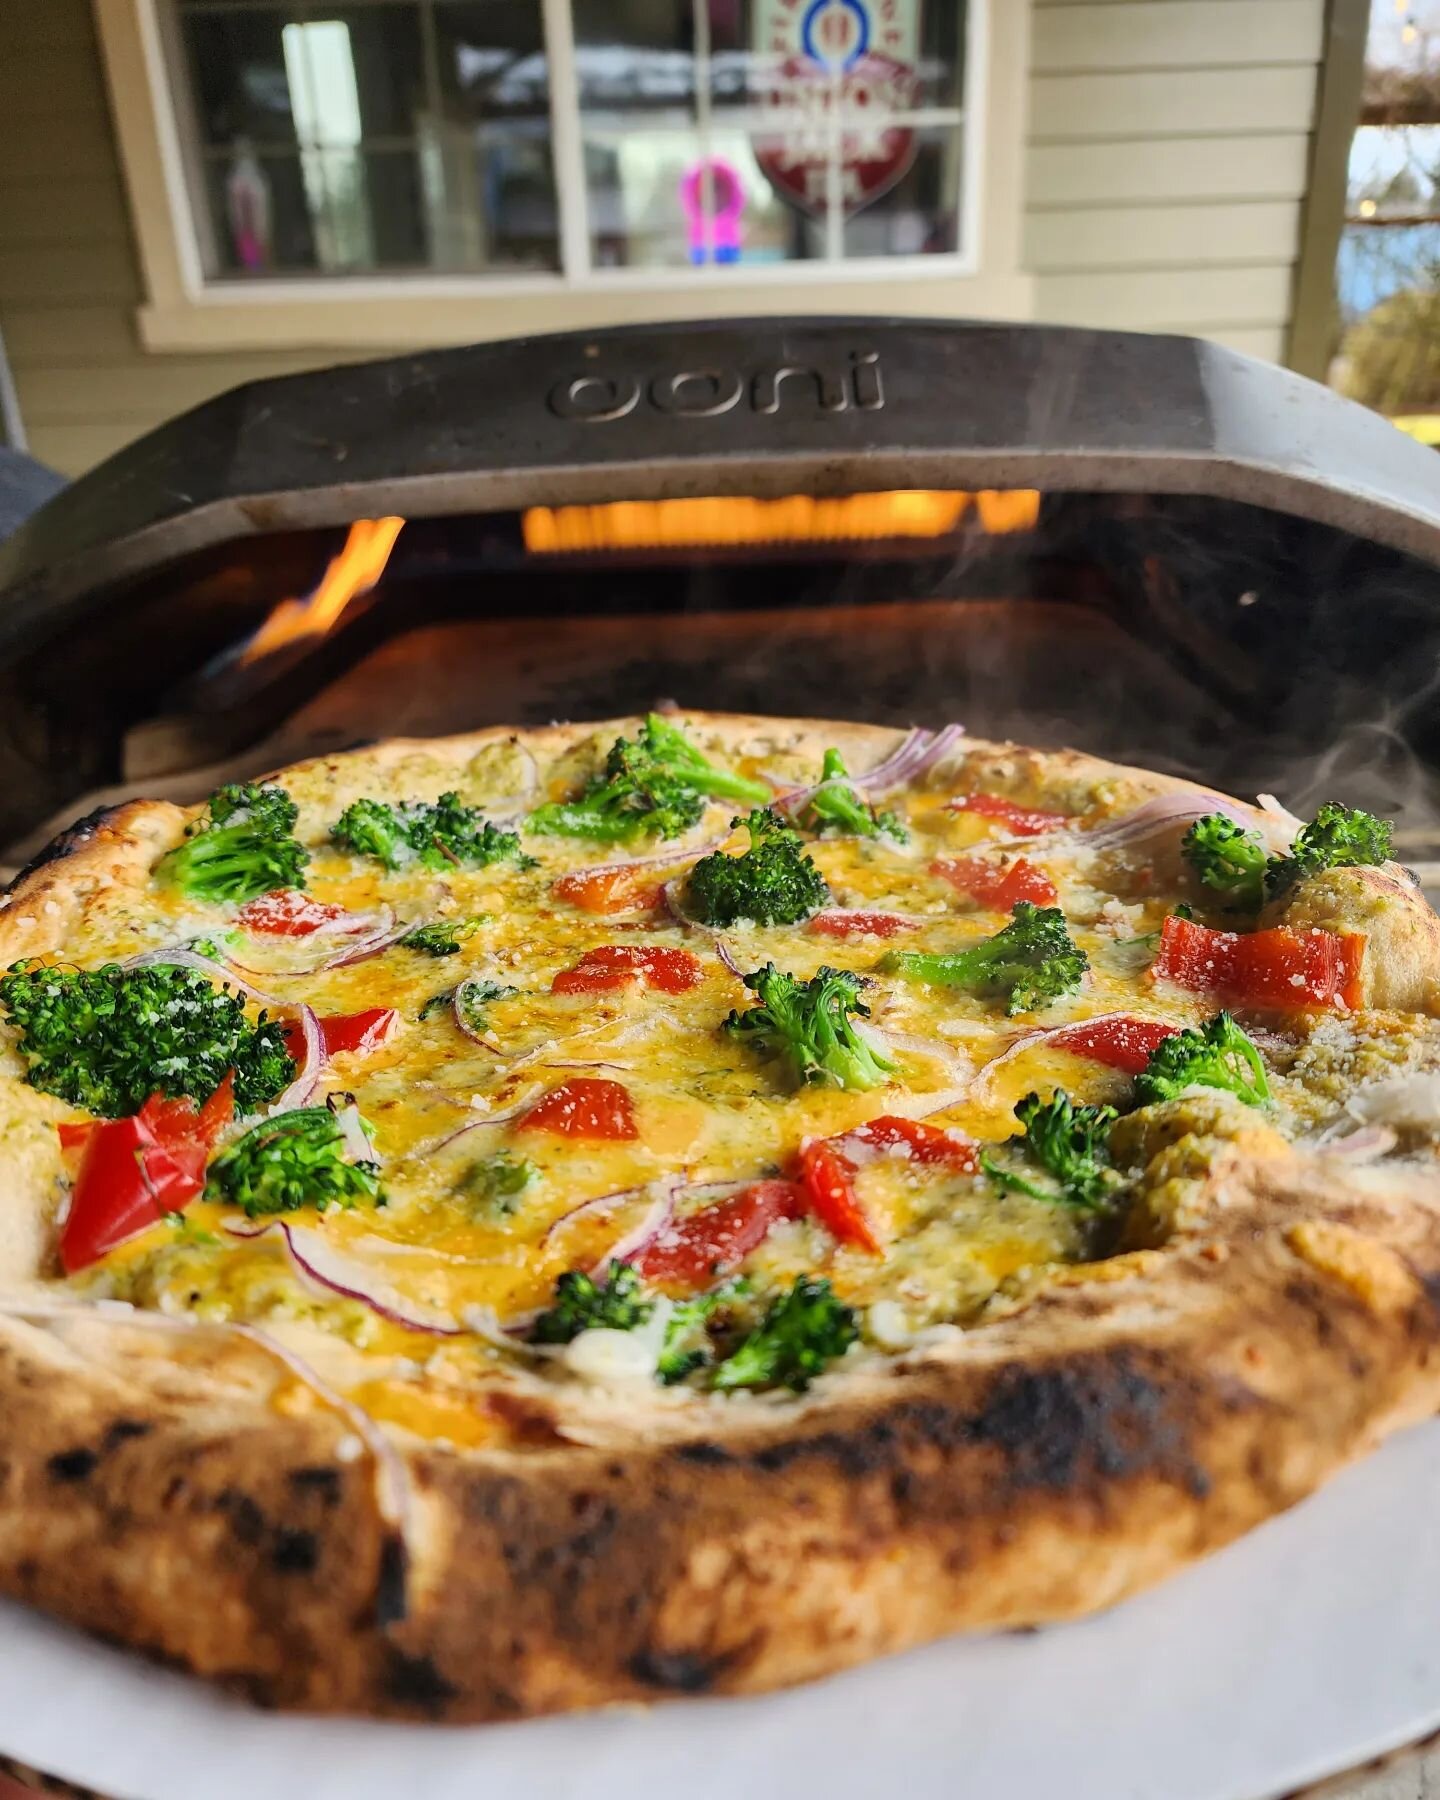 Y'all been sleeping on the Broccoliscious. This is the perfect spring-ish  pie (cuz let's be real, mother nature ain't exactly been sweet recently) broccoli cheddar cream, clothbound Irish cheddar, red onion sweet peppers, and roasted broccoli. 

On 